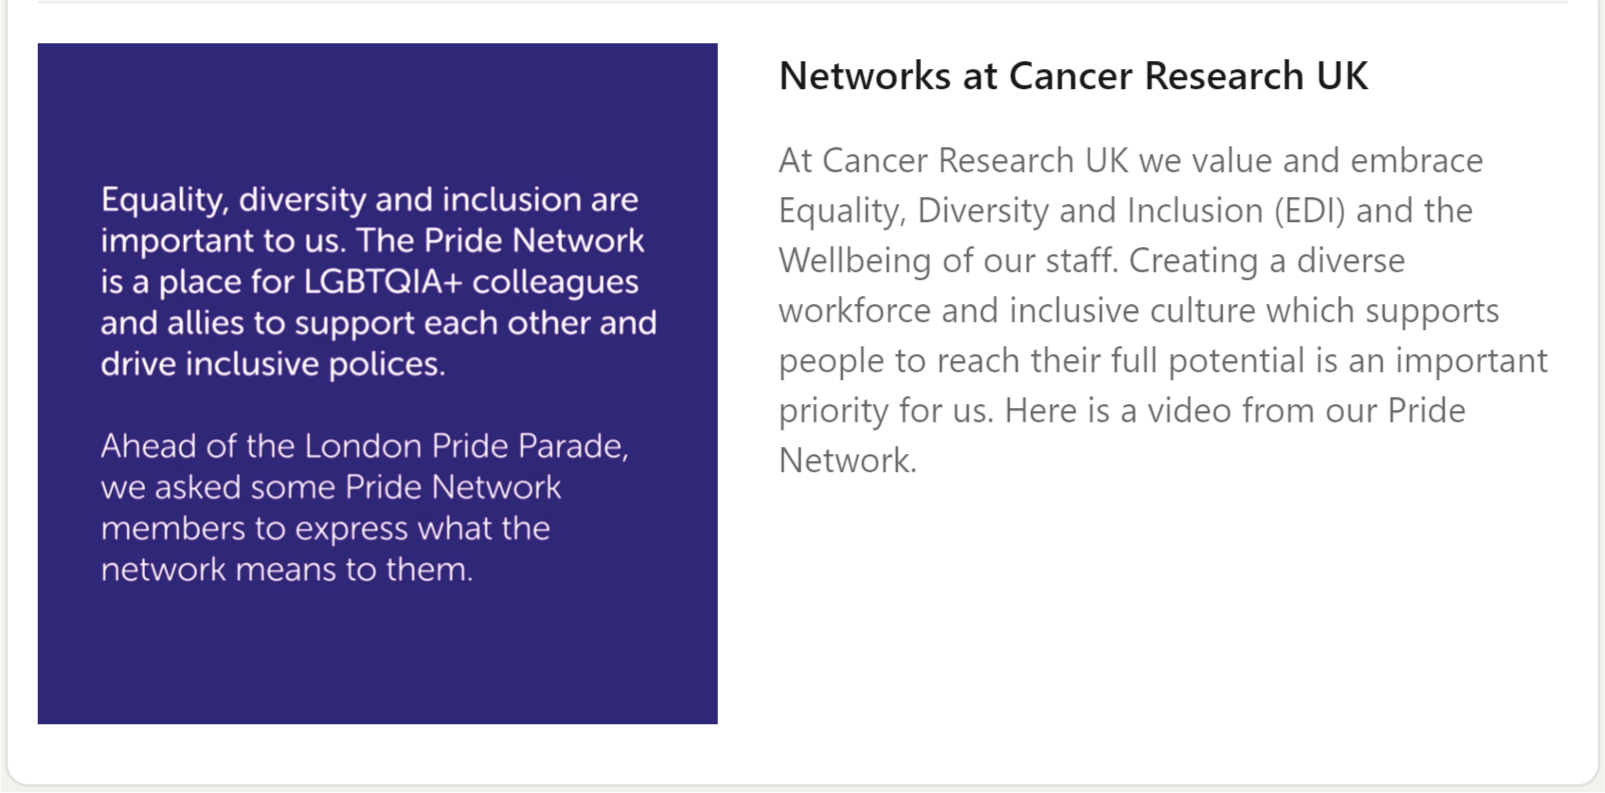 The Networks at Cancer Research UK section of the organization's Career Page, featuring a video from CRUK's Pride Network.